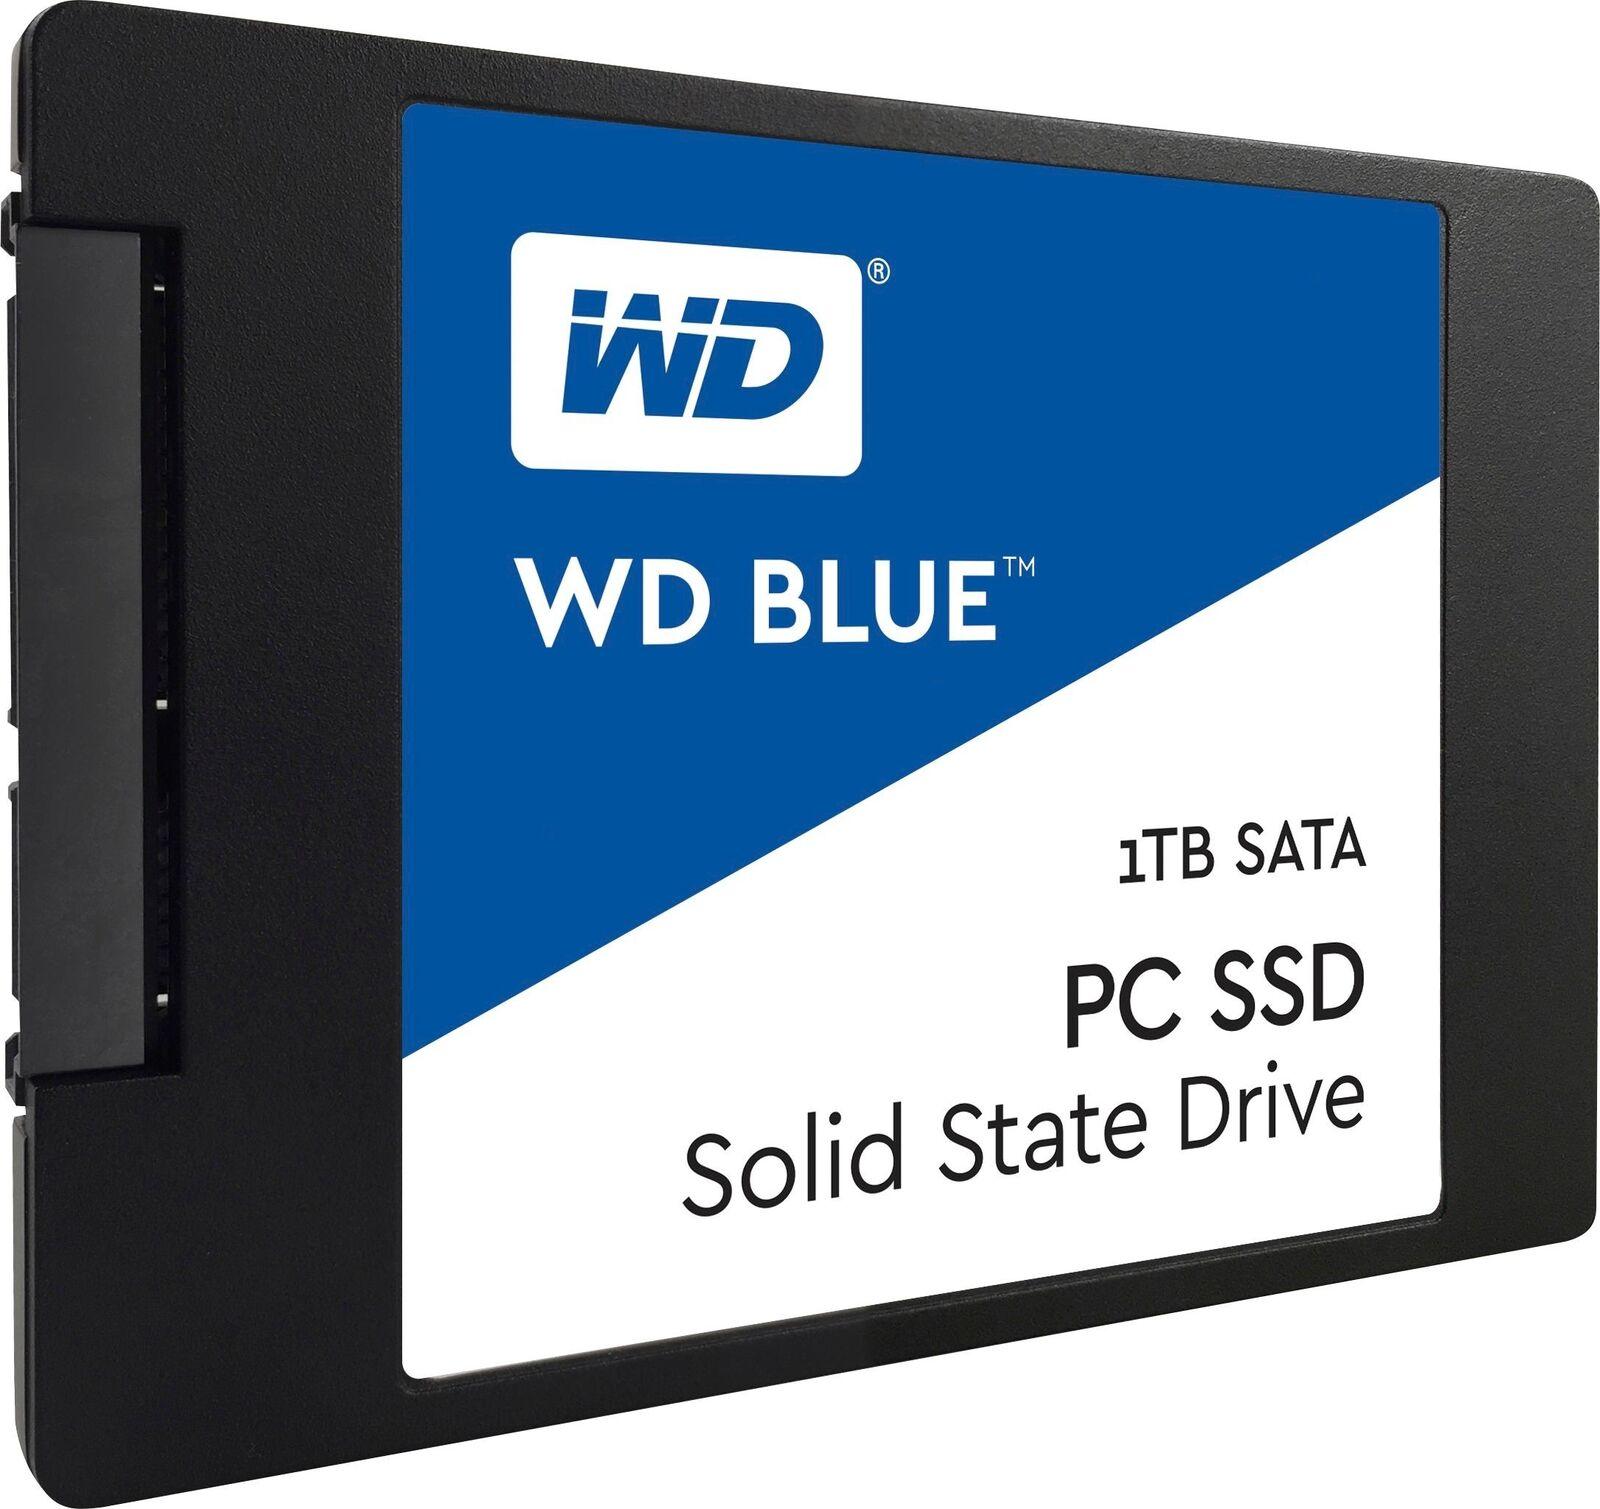 1TB WD Blue 2.5in SATA Solid State Drive SSD for $99.99 Shipped